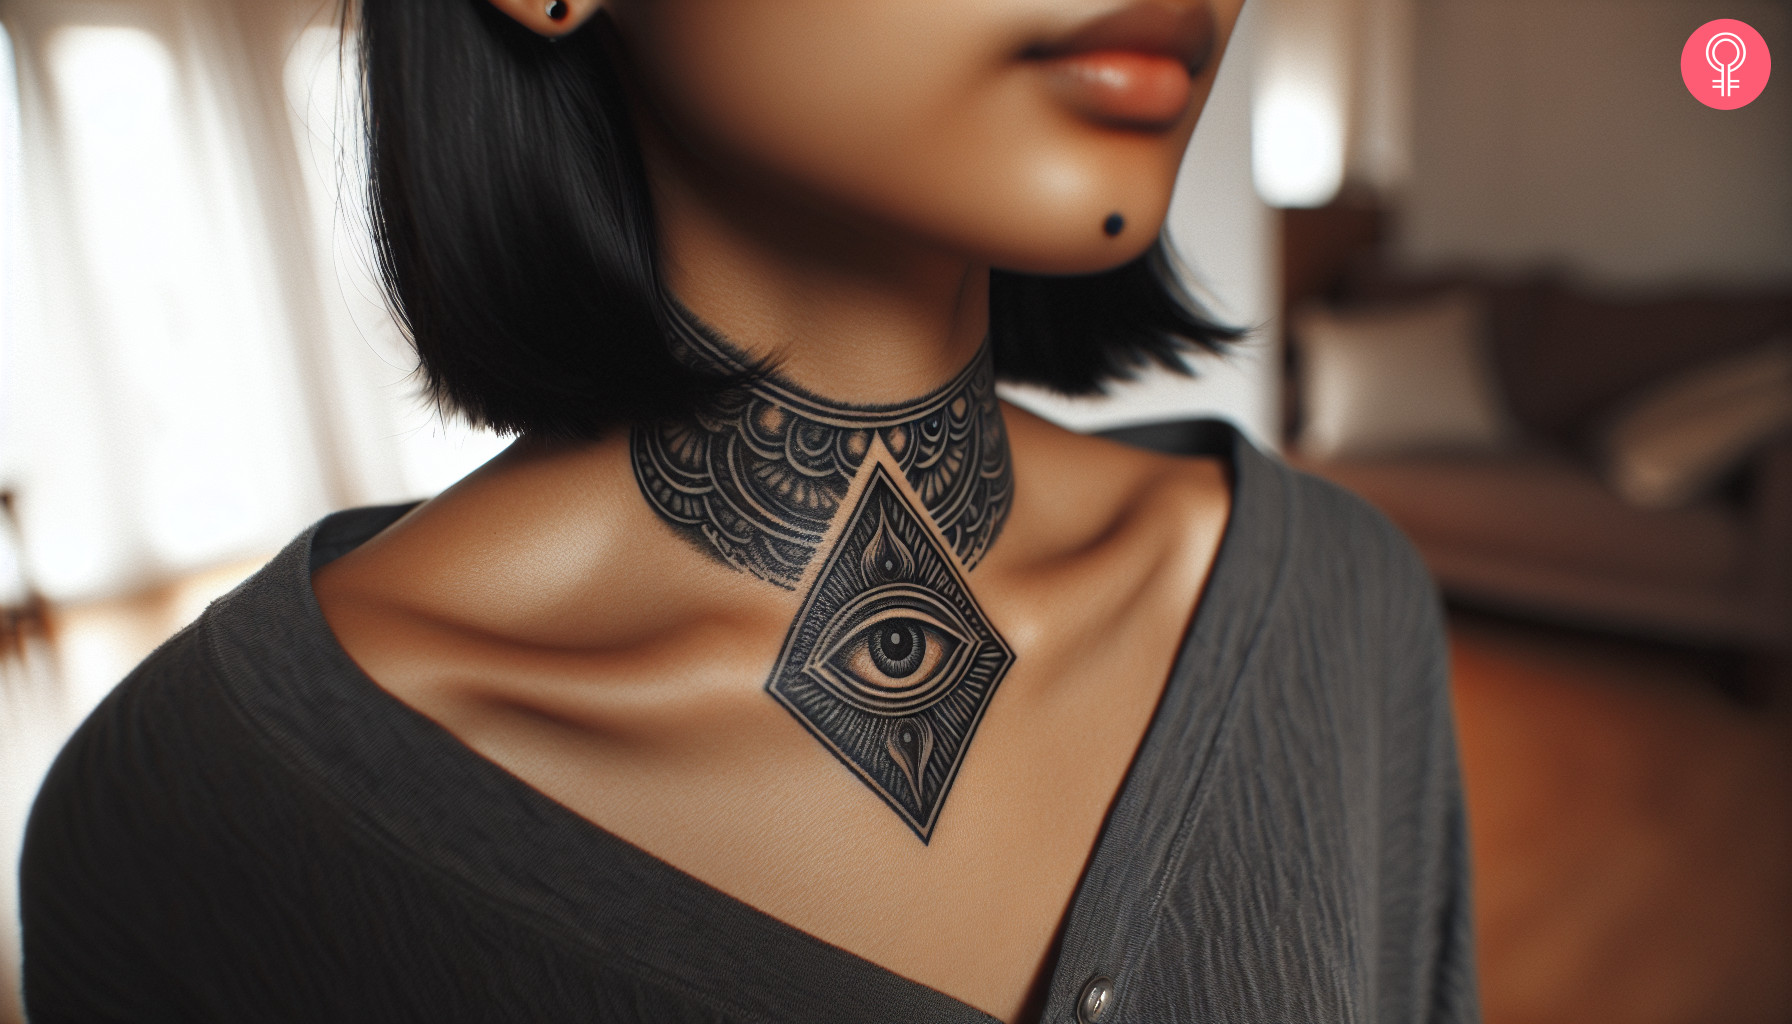 A woman with a third eye neck tattoo